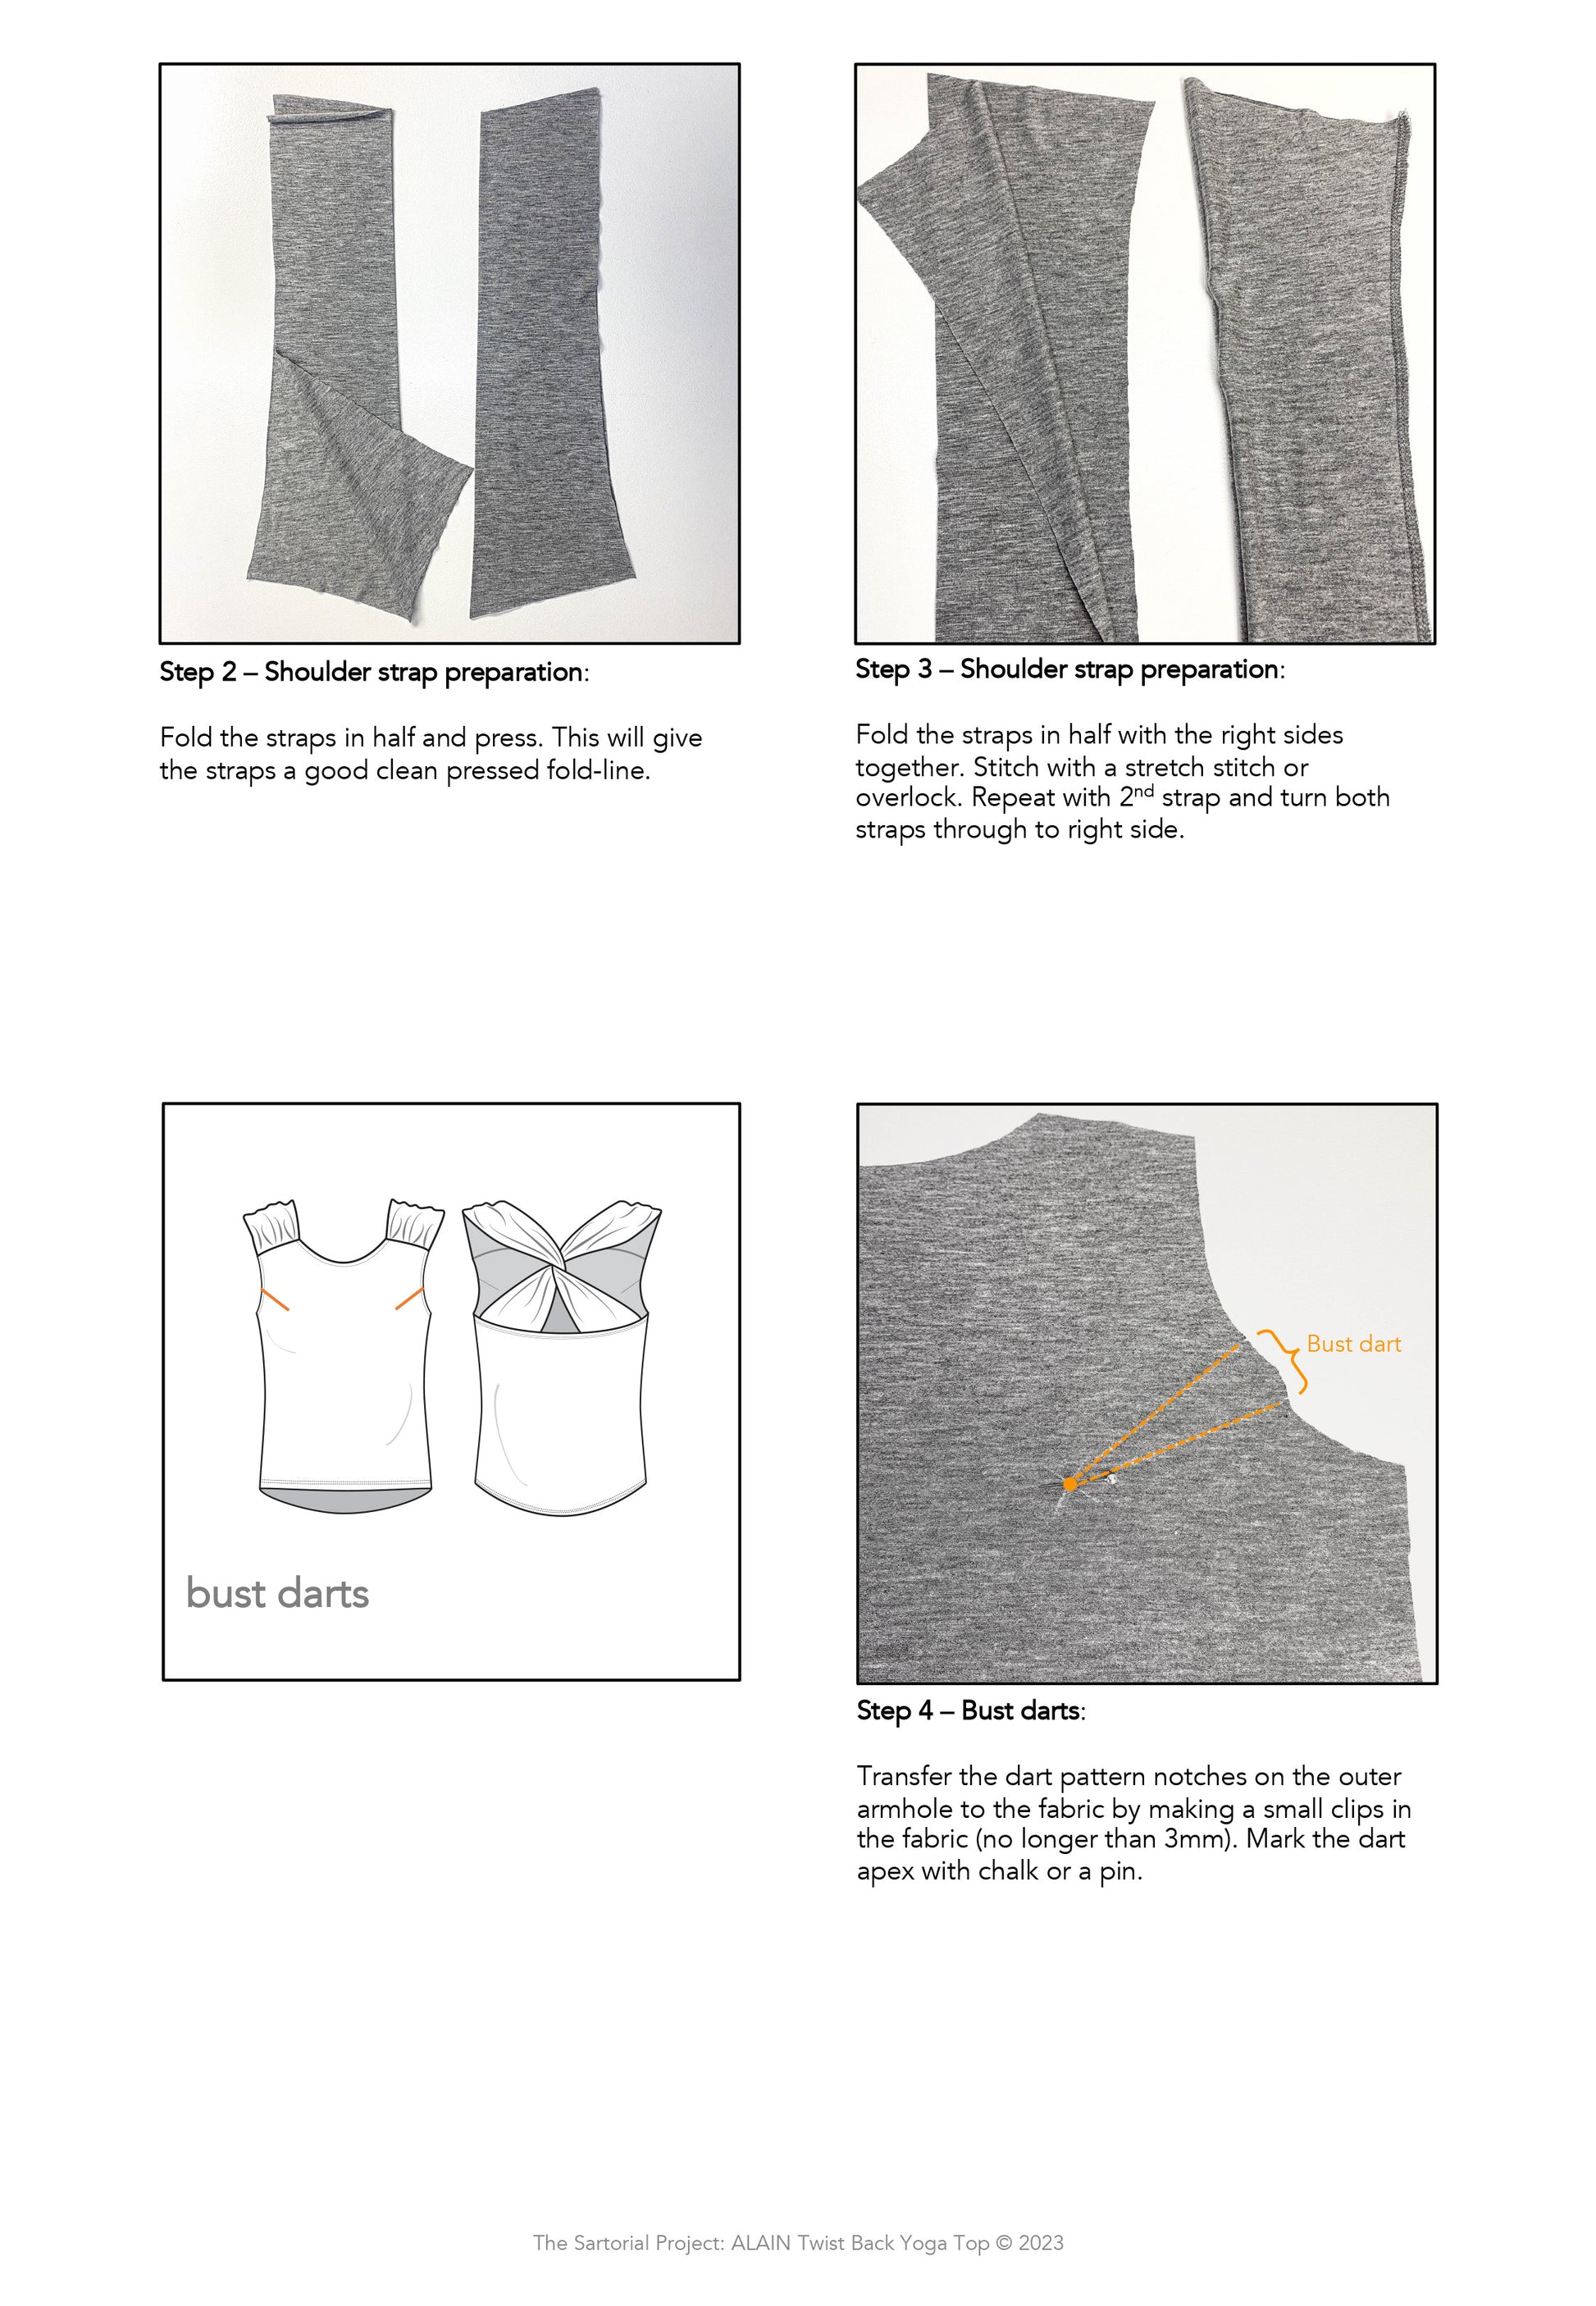 Sewing patterns for yoga clothes: 4 yoga sewing patterns, side by